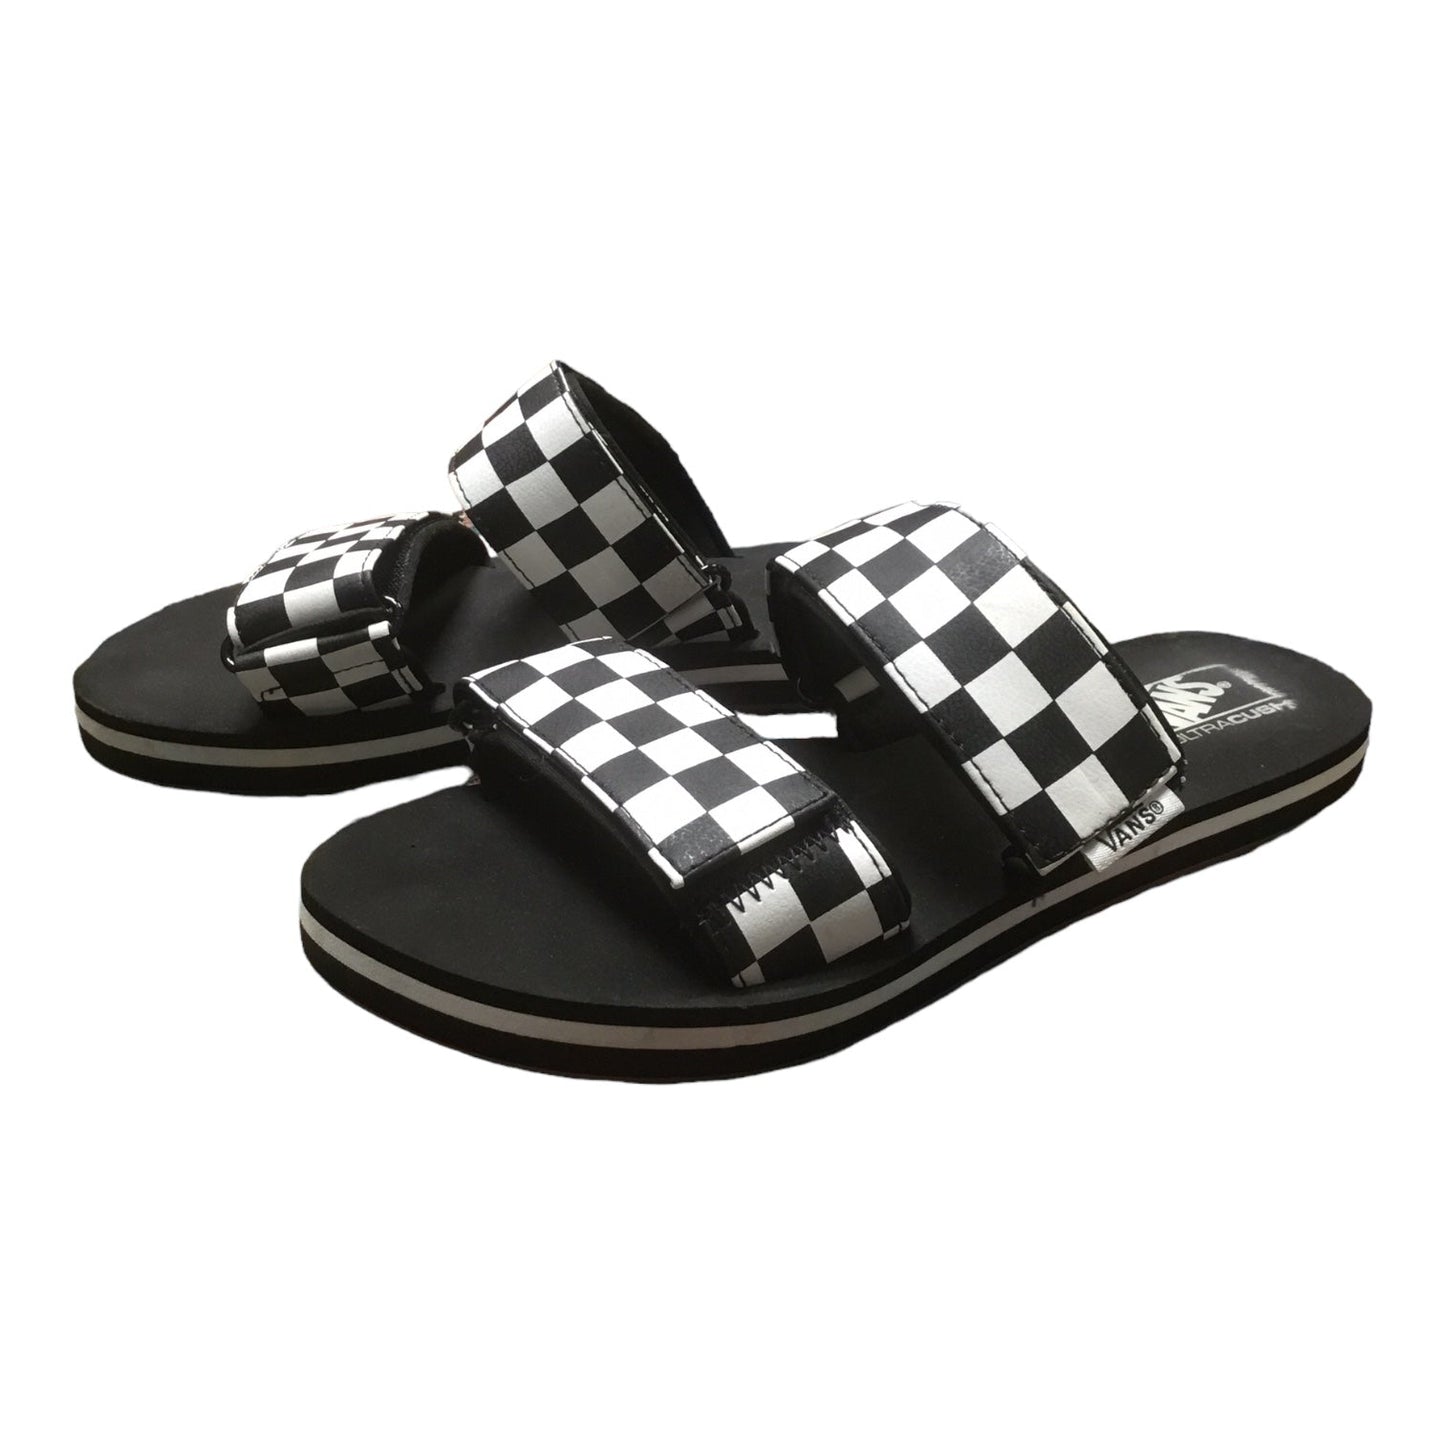 Checked Sandals Flats Vans, Size 7